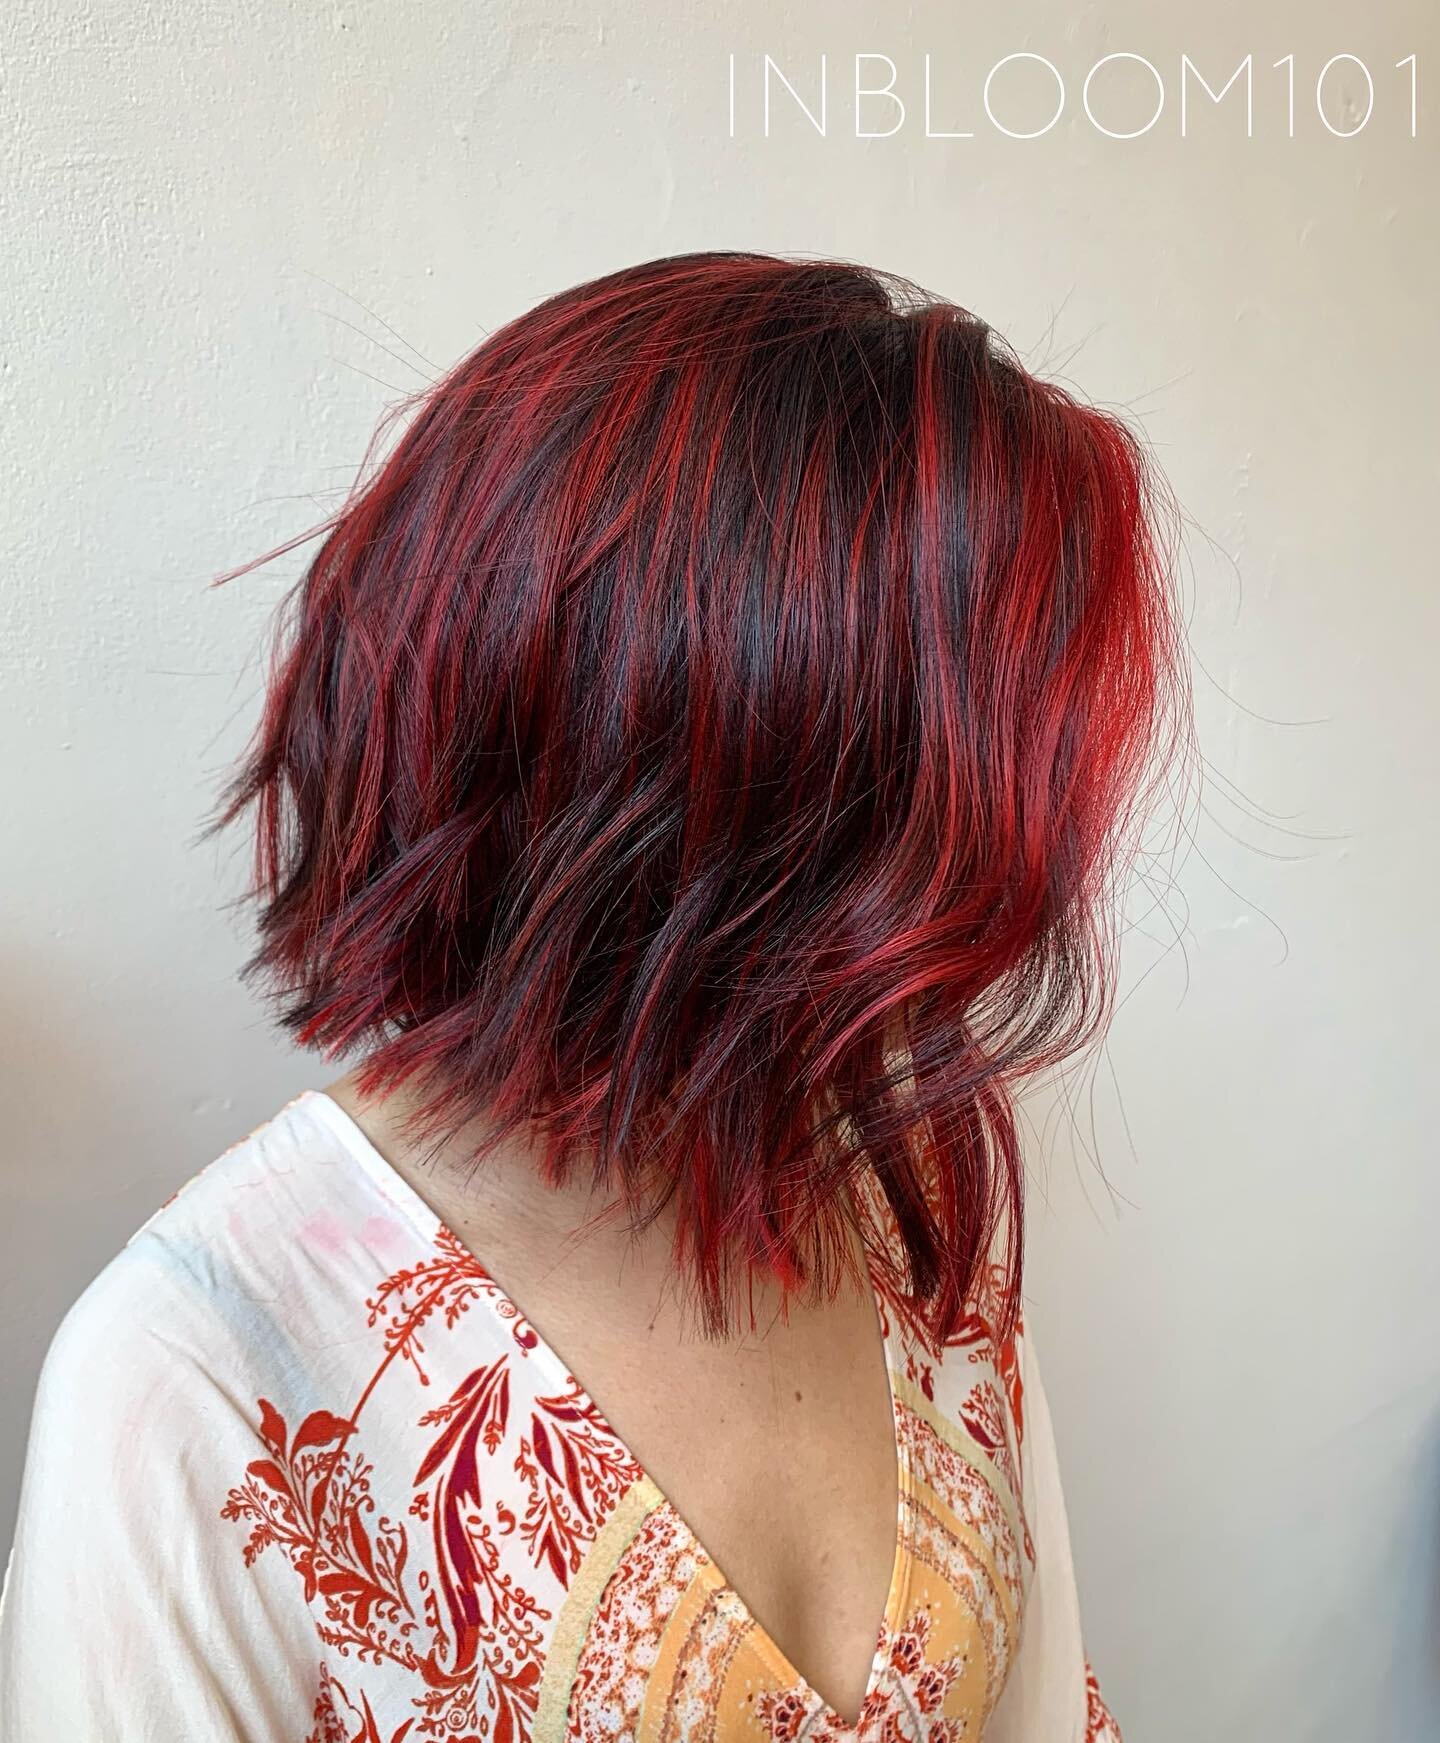 🔥🔥 𝚃𝚒𝚖𝚎 𝚏𝚘𝚛 𝚊 𝚌𝚑𝚊𝚗𝚐𝚎 🔥🔥
.
13 inches of hair gone and so deep red color will scream change any day! 
.
.
.
.
📲INBLOOM101.com for online booking 
.
.
. ⠀
#inbloom101 #seattle #seattlehairstylist #balayage #blondehair #redhair #seattl